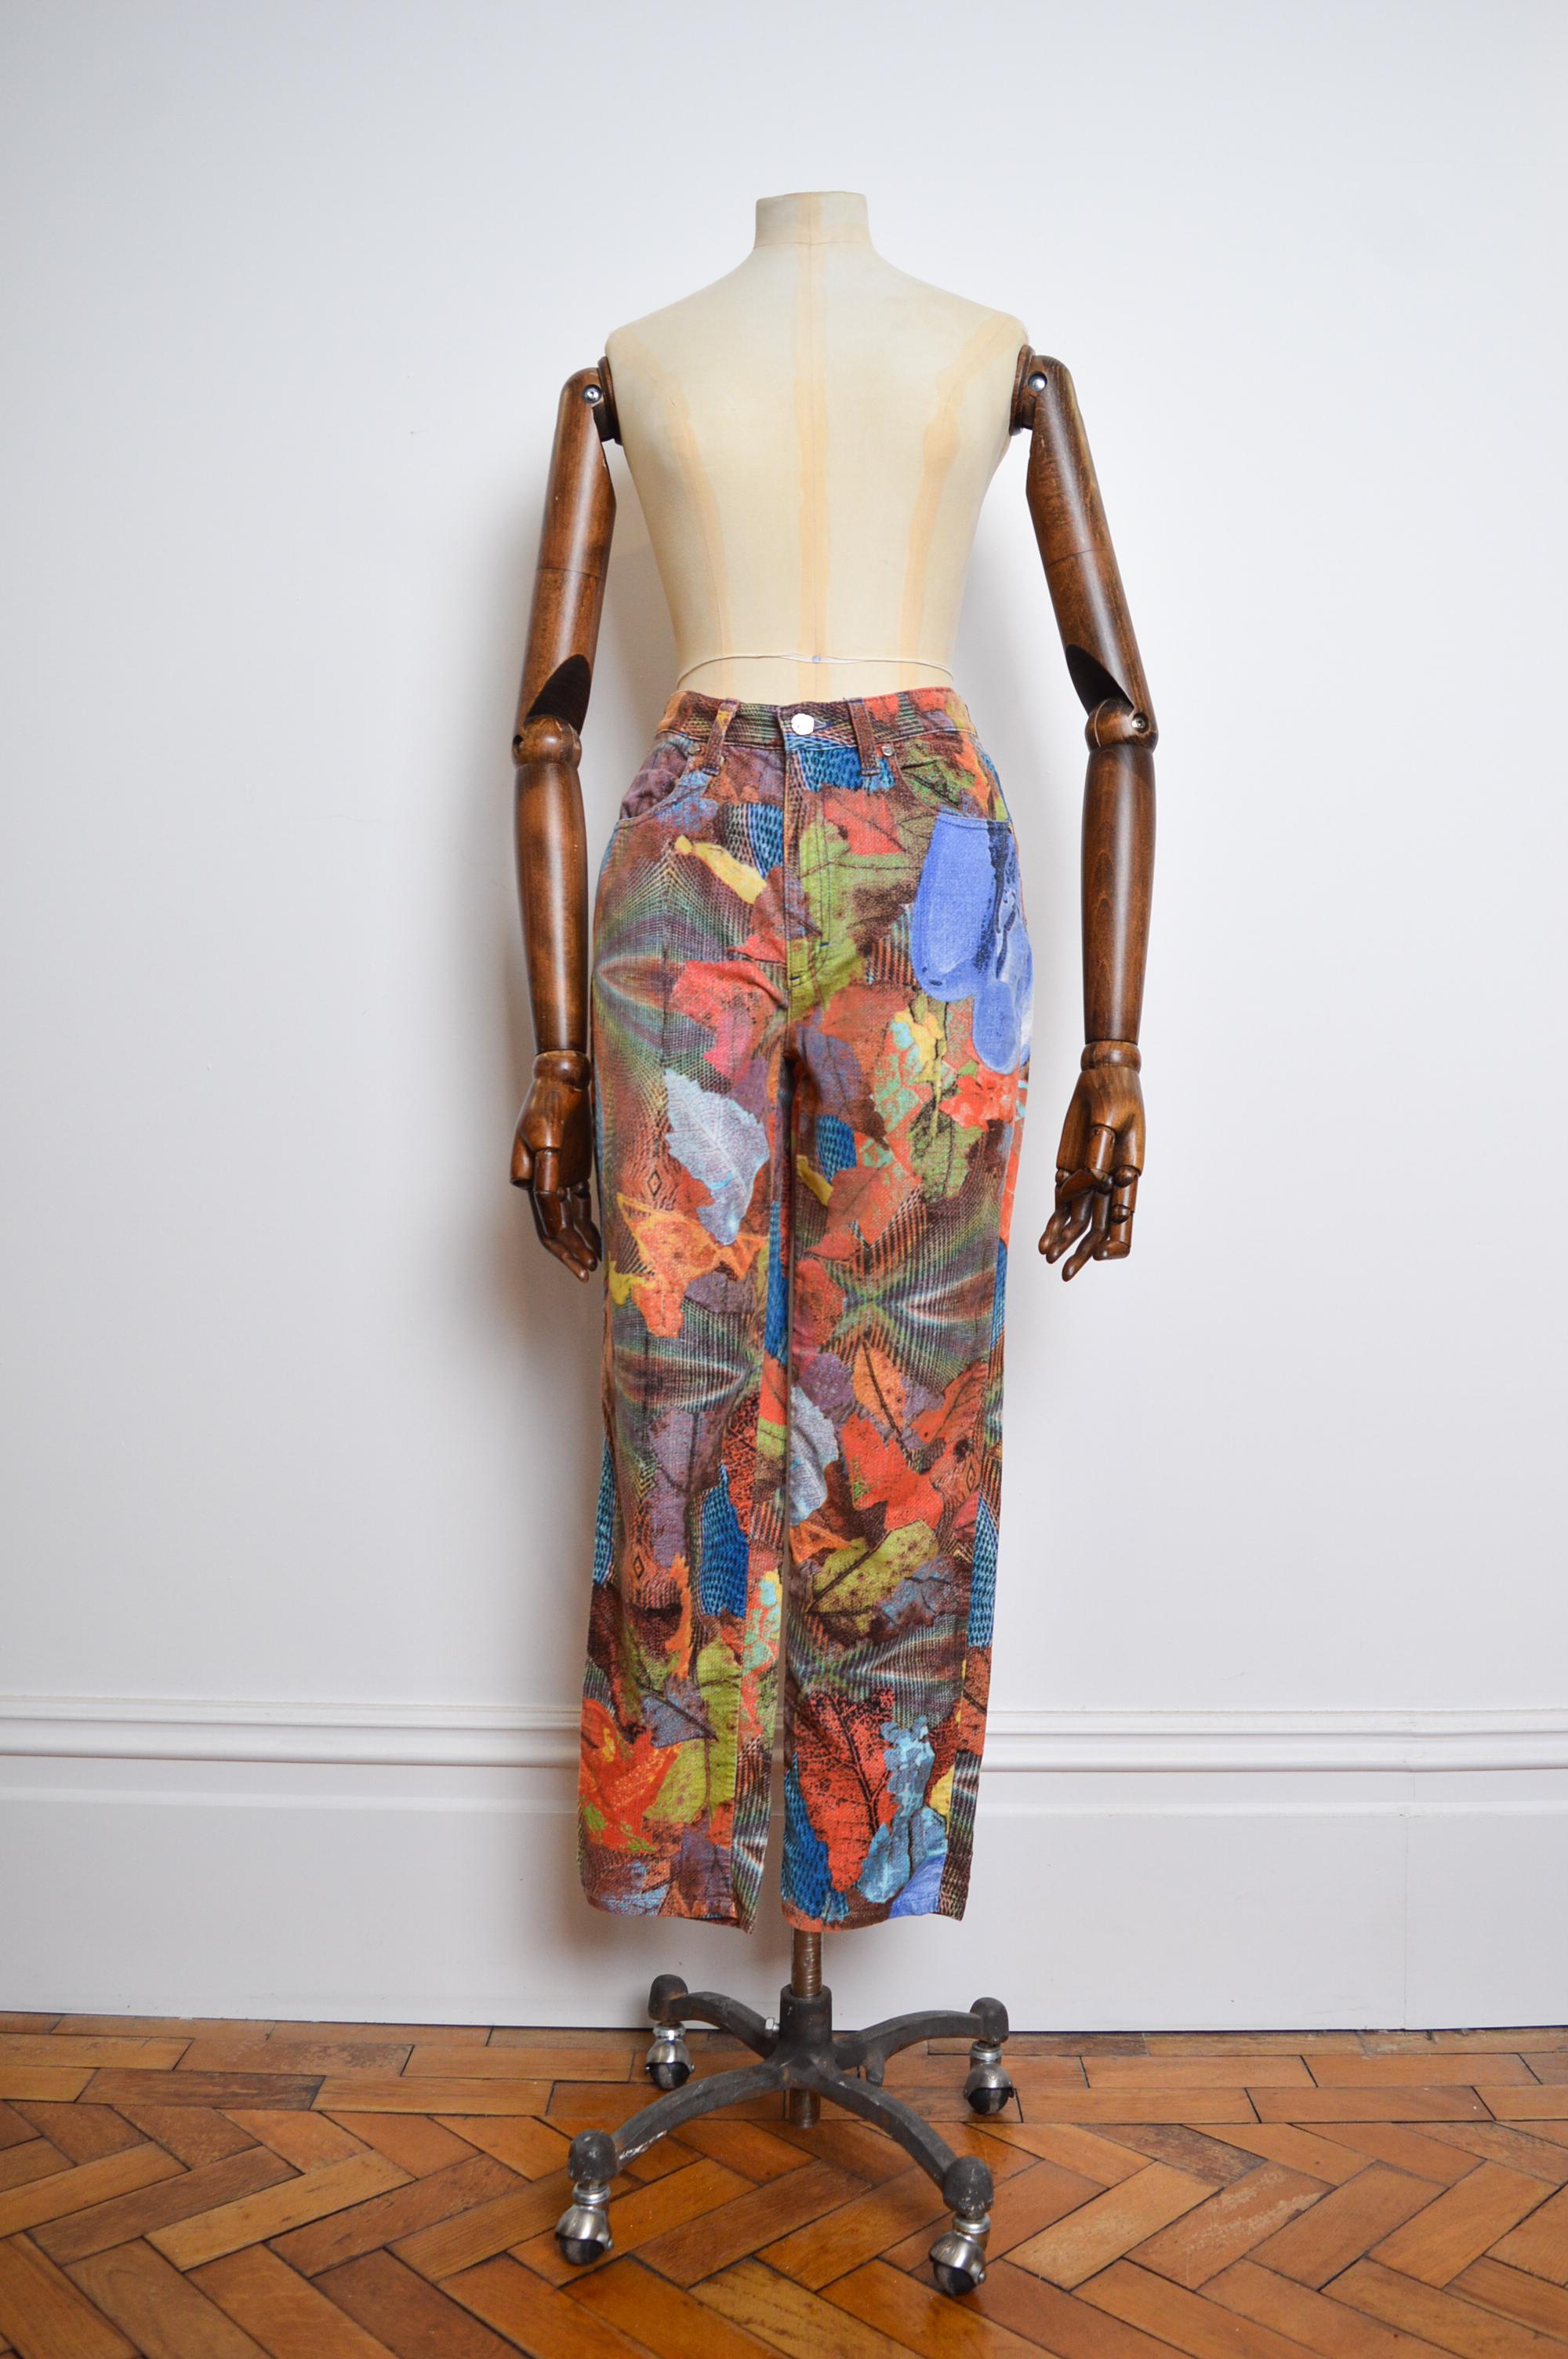 Superb, Trippy Vintage, 1990's High Waisted pants by CHRISTIAN LACROIX.   

MADE IN ITALY.

Features ; 100% Cotton / Zip and Button closure / Classic 4 Pocket design, Pshychedelic printed super soft velvet material.  

Measurements are provided in